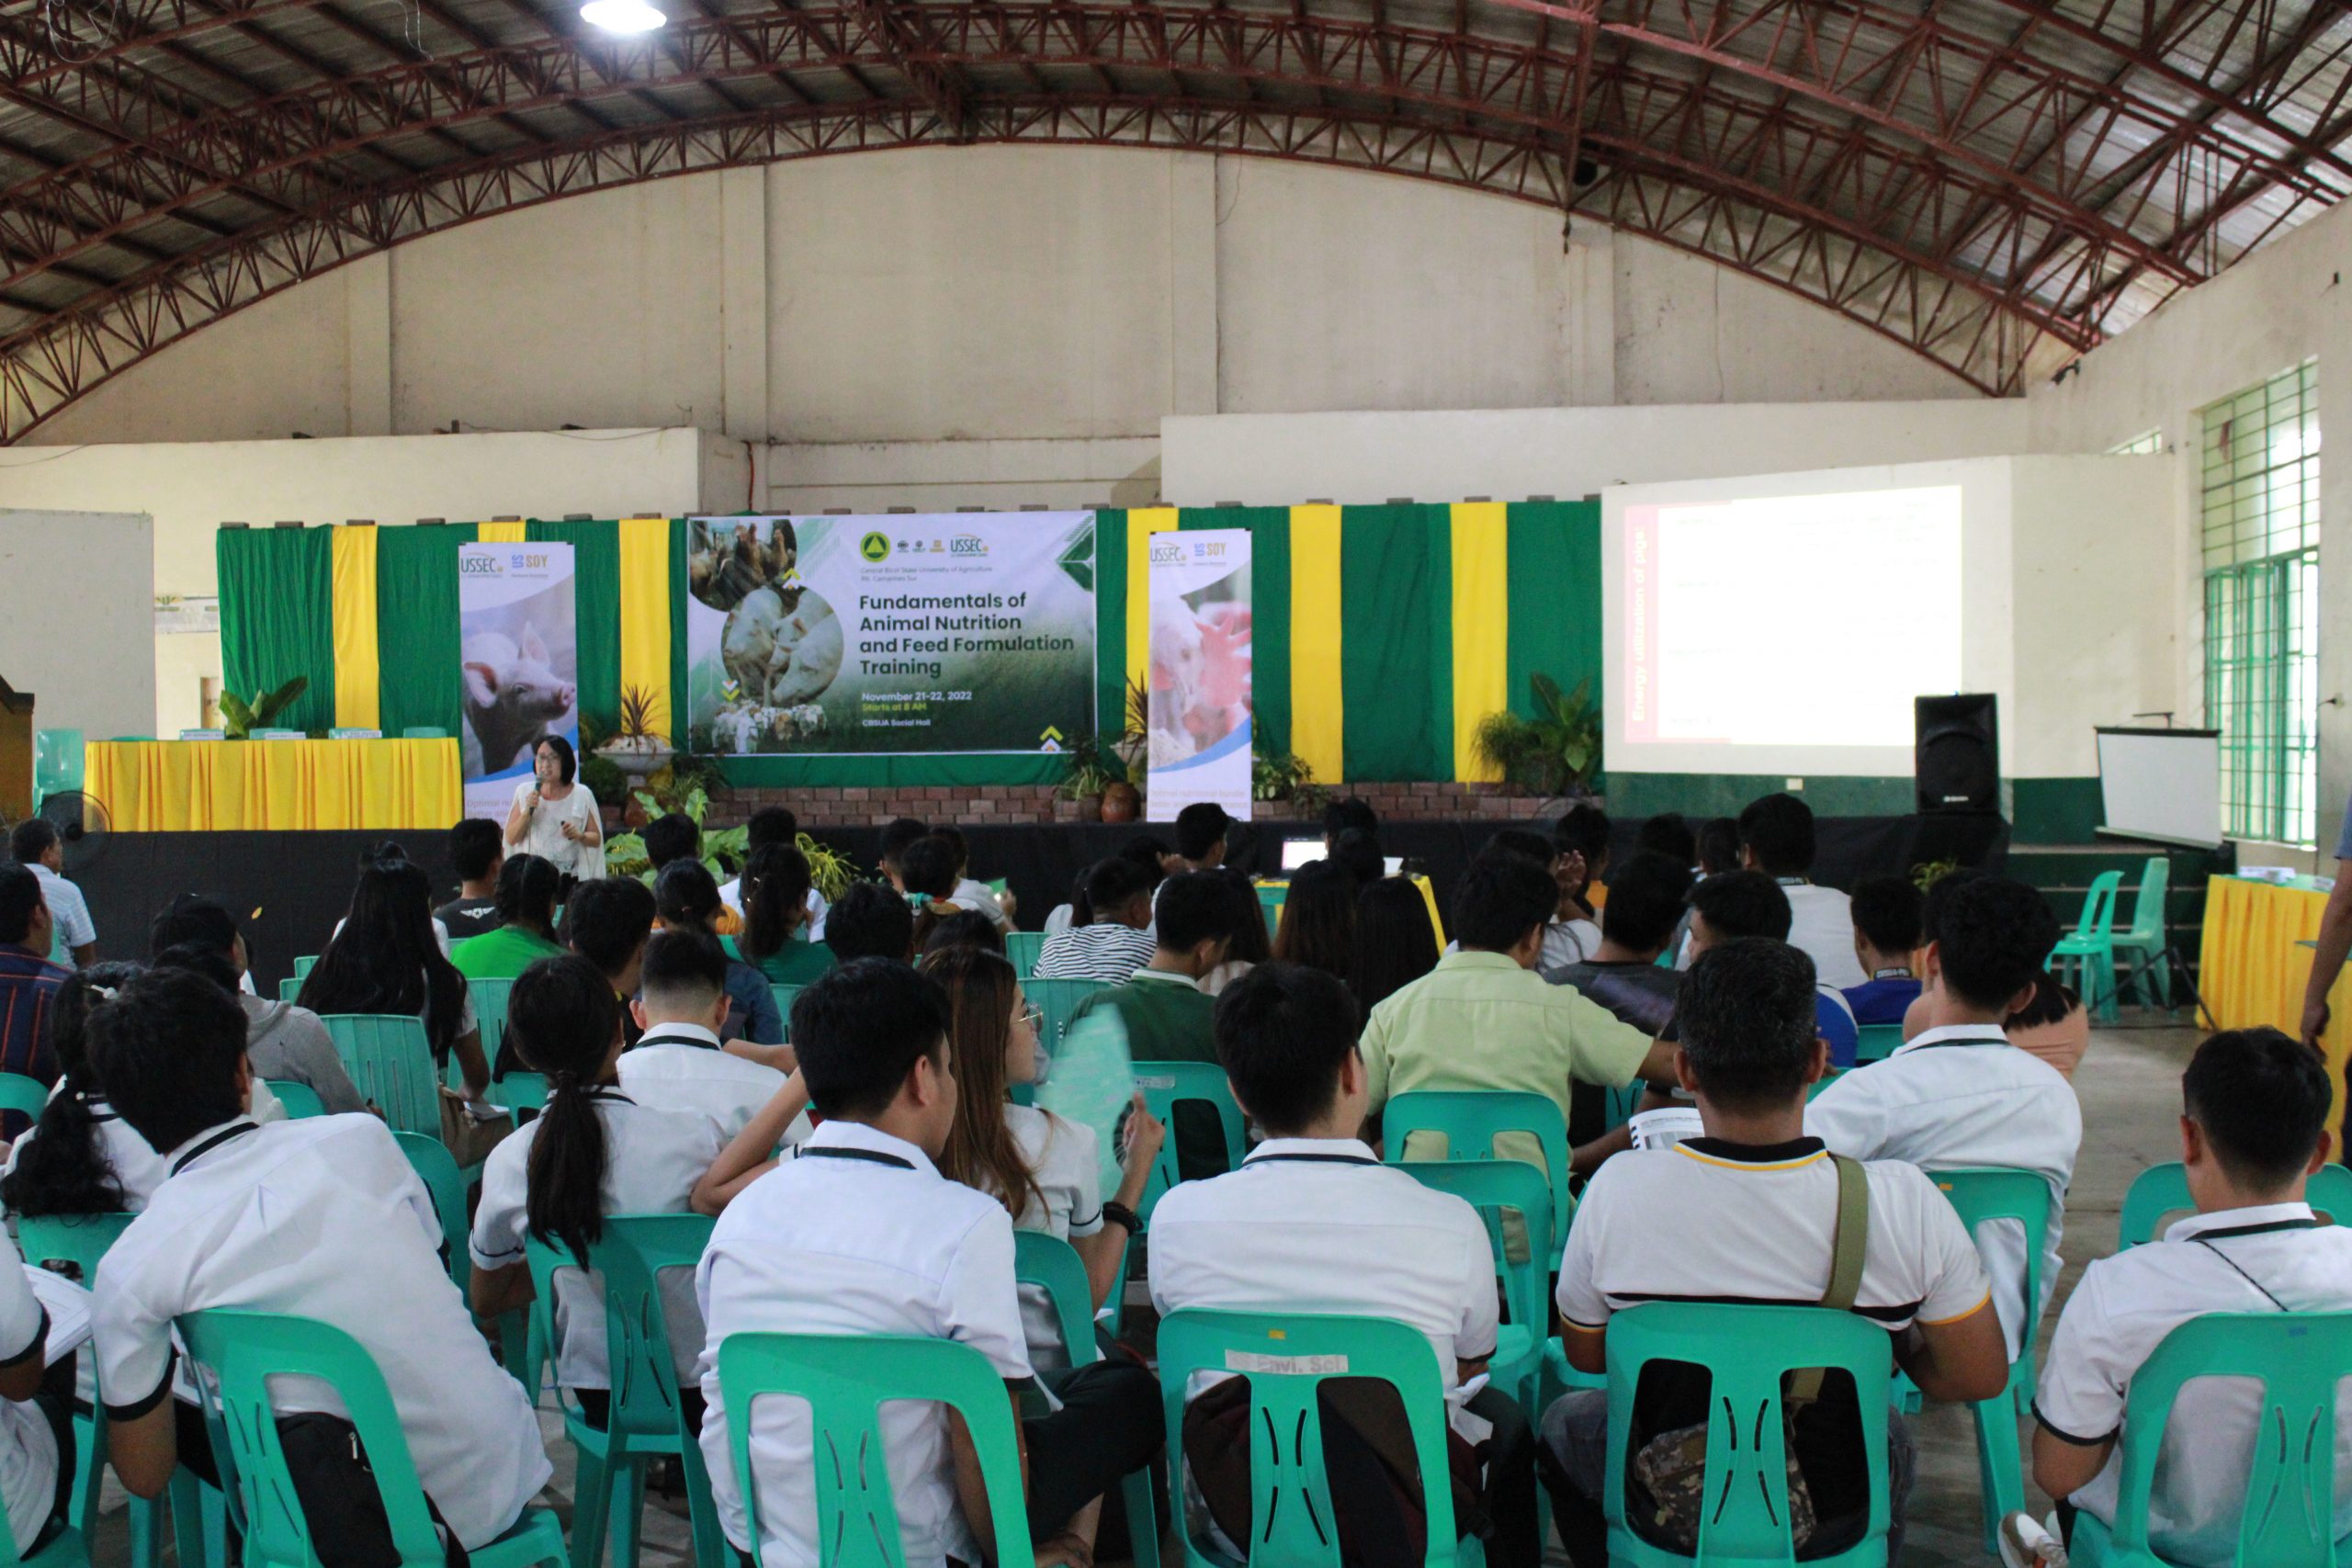 CANR SPEARHEADS TRAINING ON FUNDAMENTALS OF ANIMAL NUTRITION, FEED FORMULATION